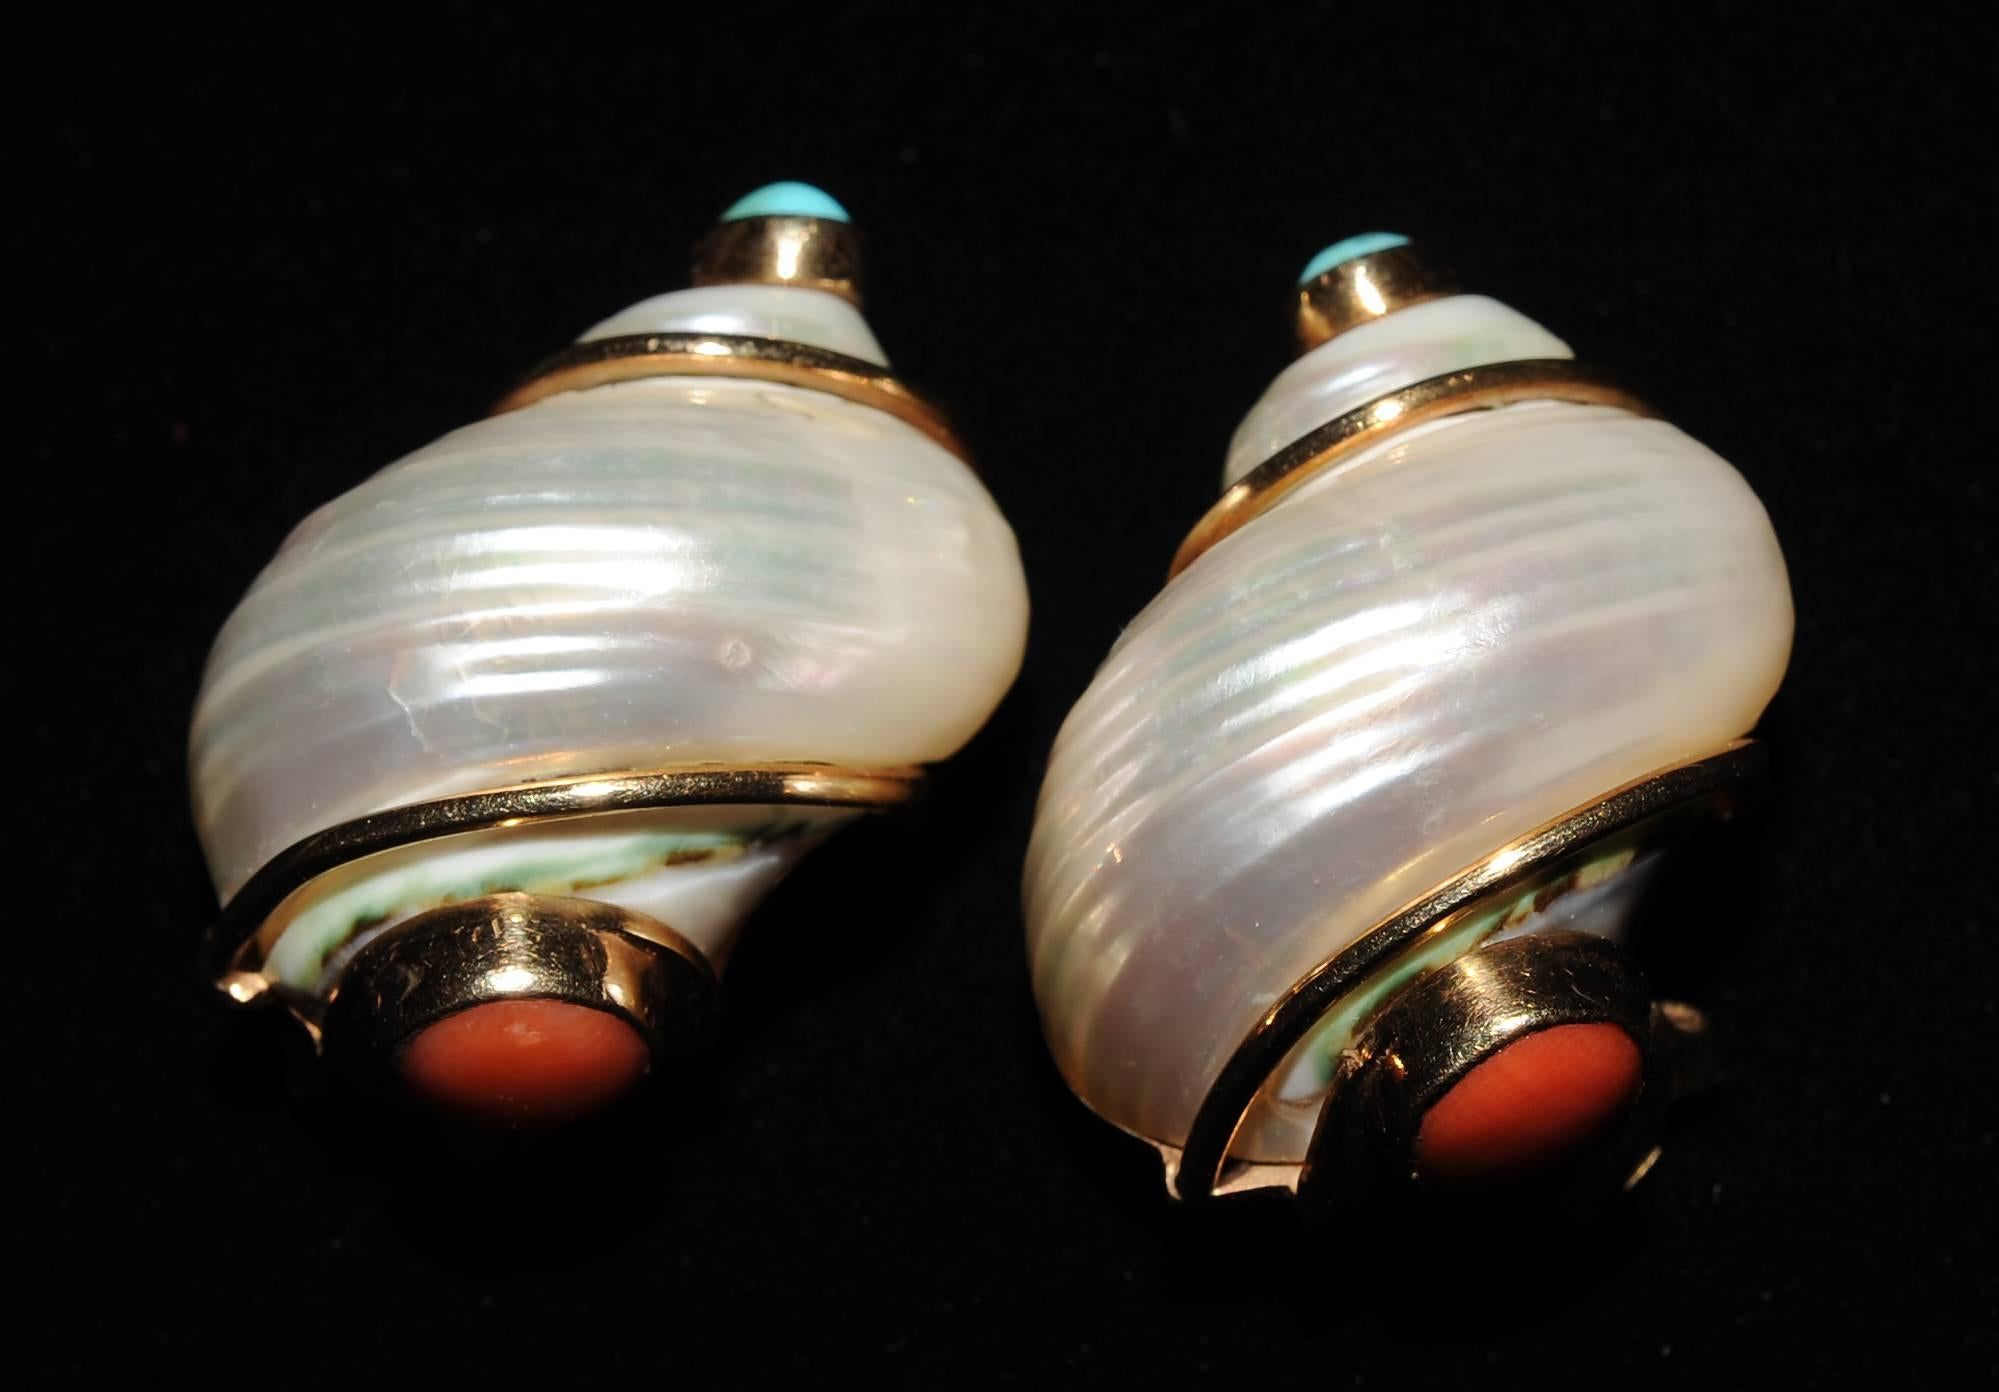 Classic Seaman Schepps turbo shell earrings are wrapped in gold and topped with bezel set turquoise stones. Adding interest the bottom of the earring is bezel set with coral. The earrings are stamped Seaman Schepps and 14K on the back. They are in